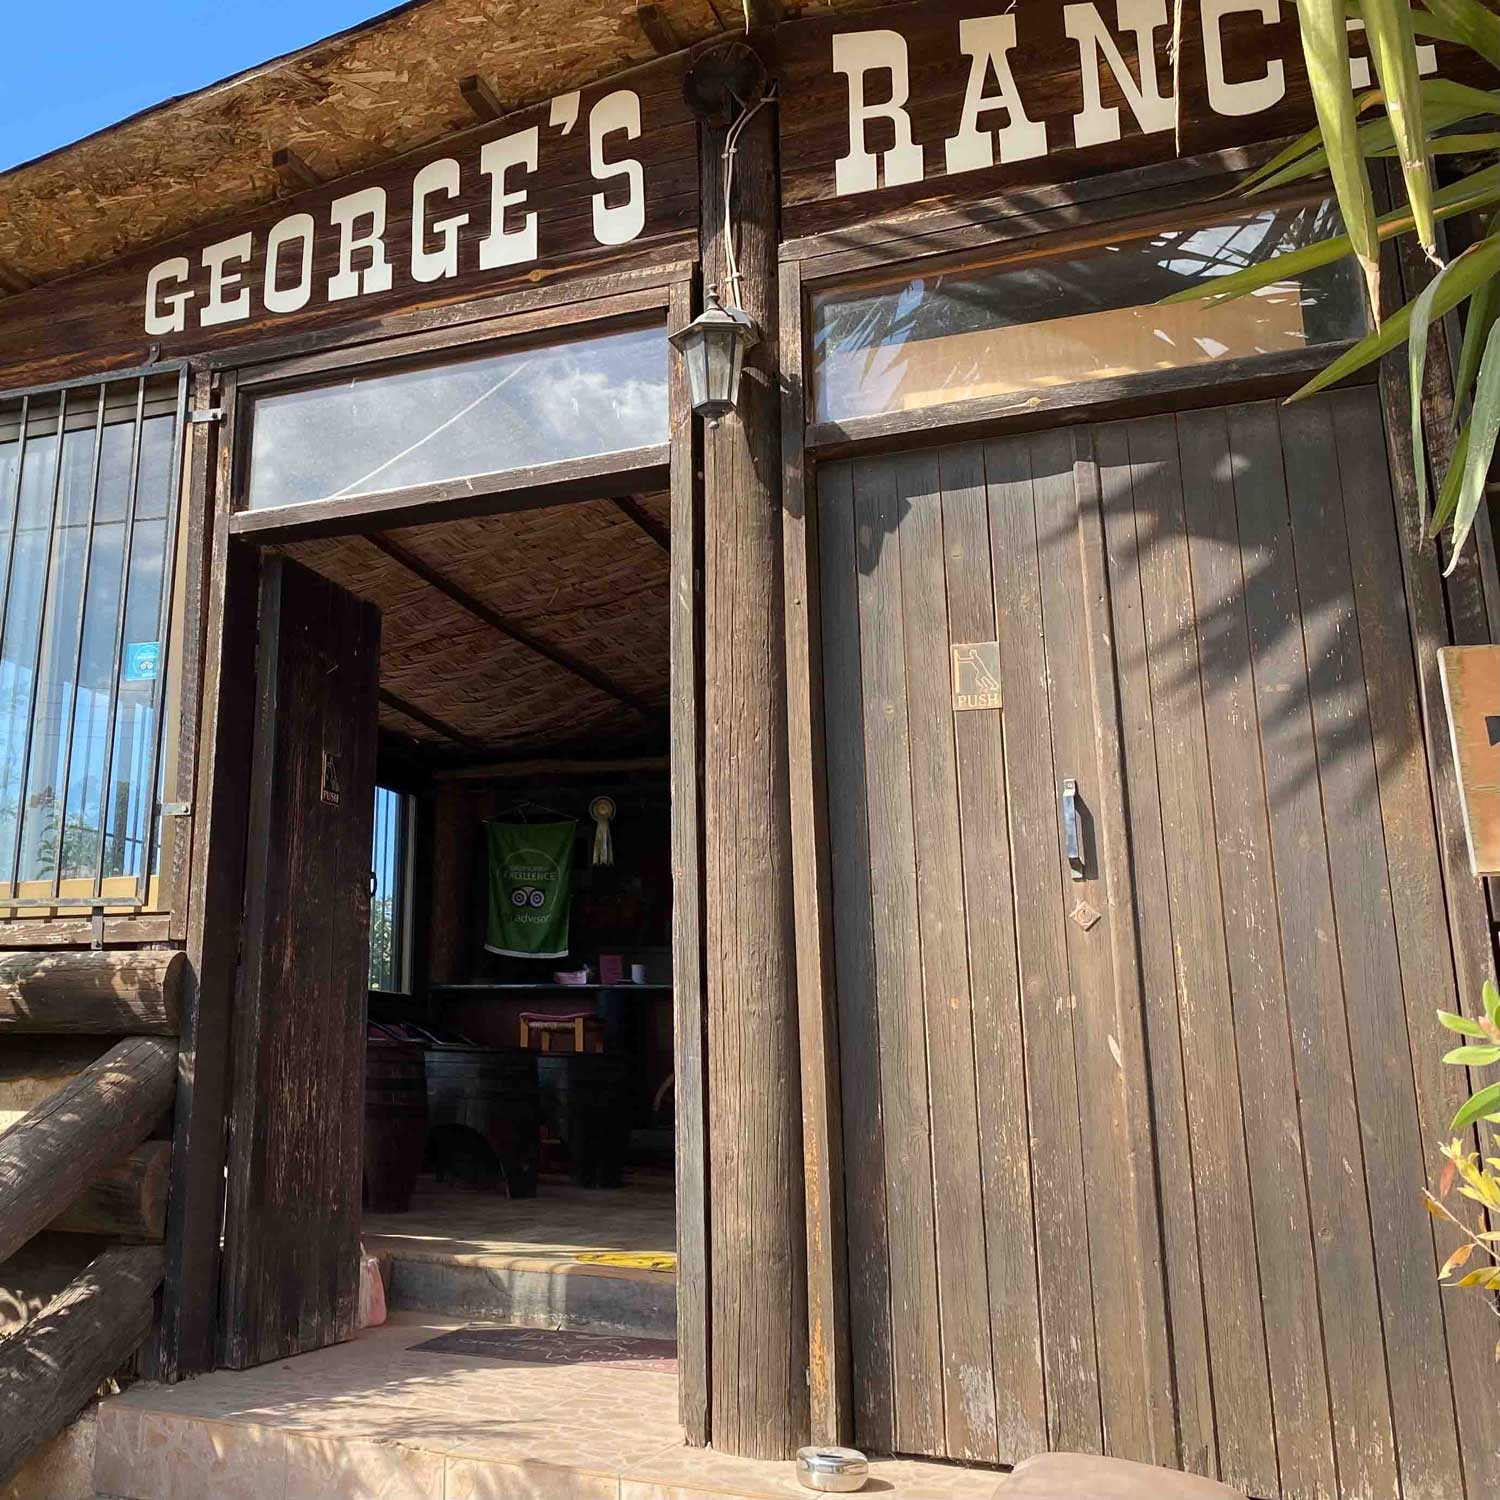 George's Ranch Riding Stables